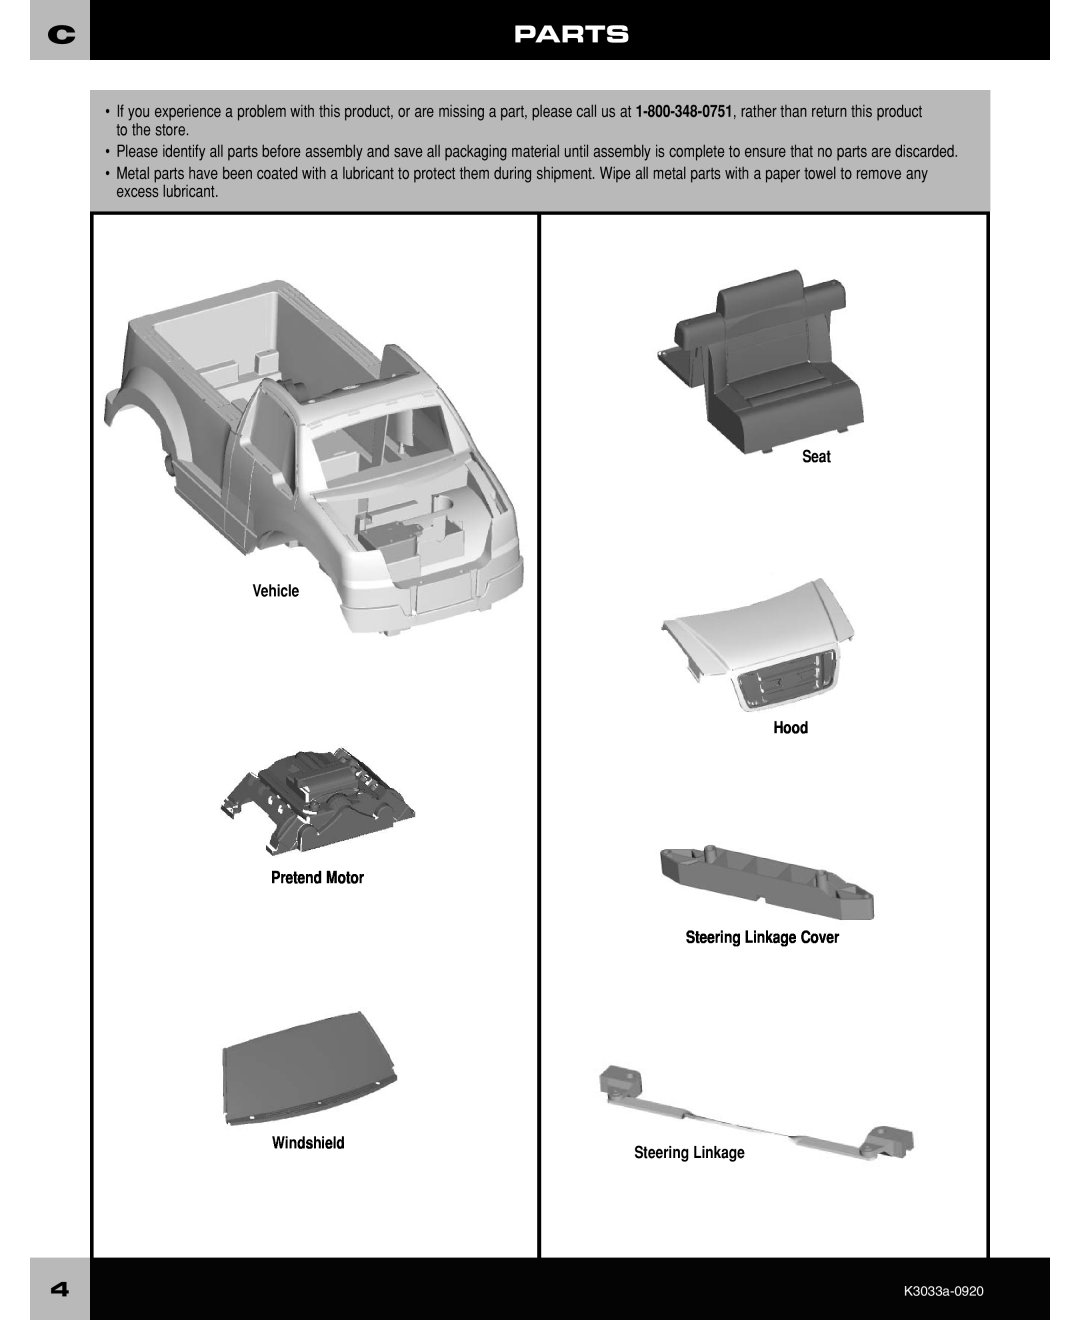 Ford F-150 owner manual Cparts, Seat Vehicle Hood Pretend Motor, Windshield, Steering Linkage Cover Steering Linkage 